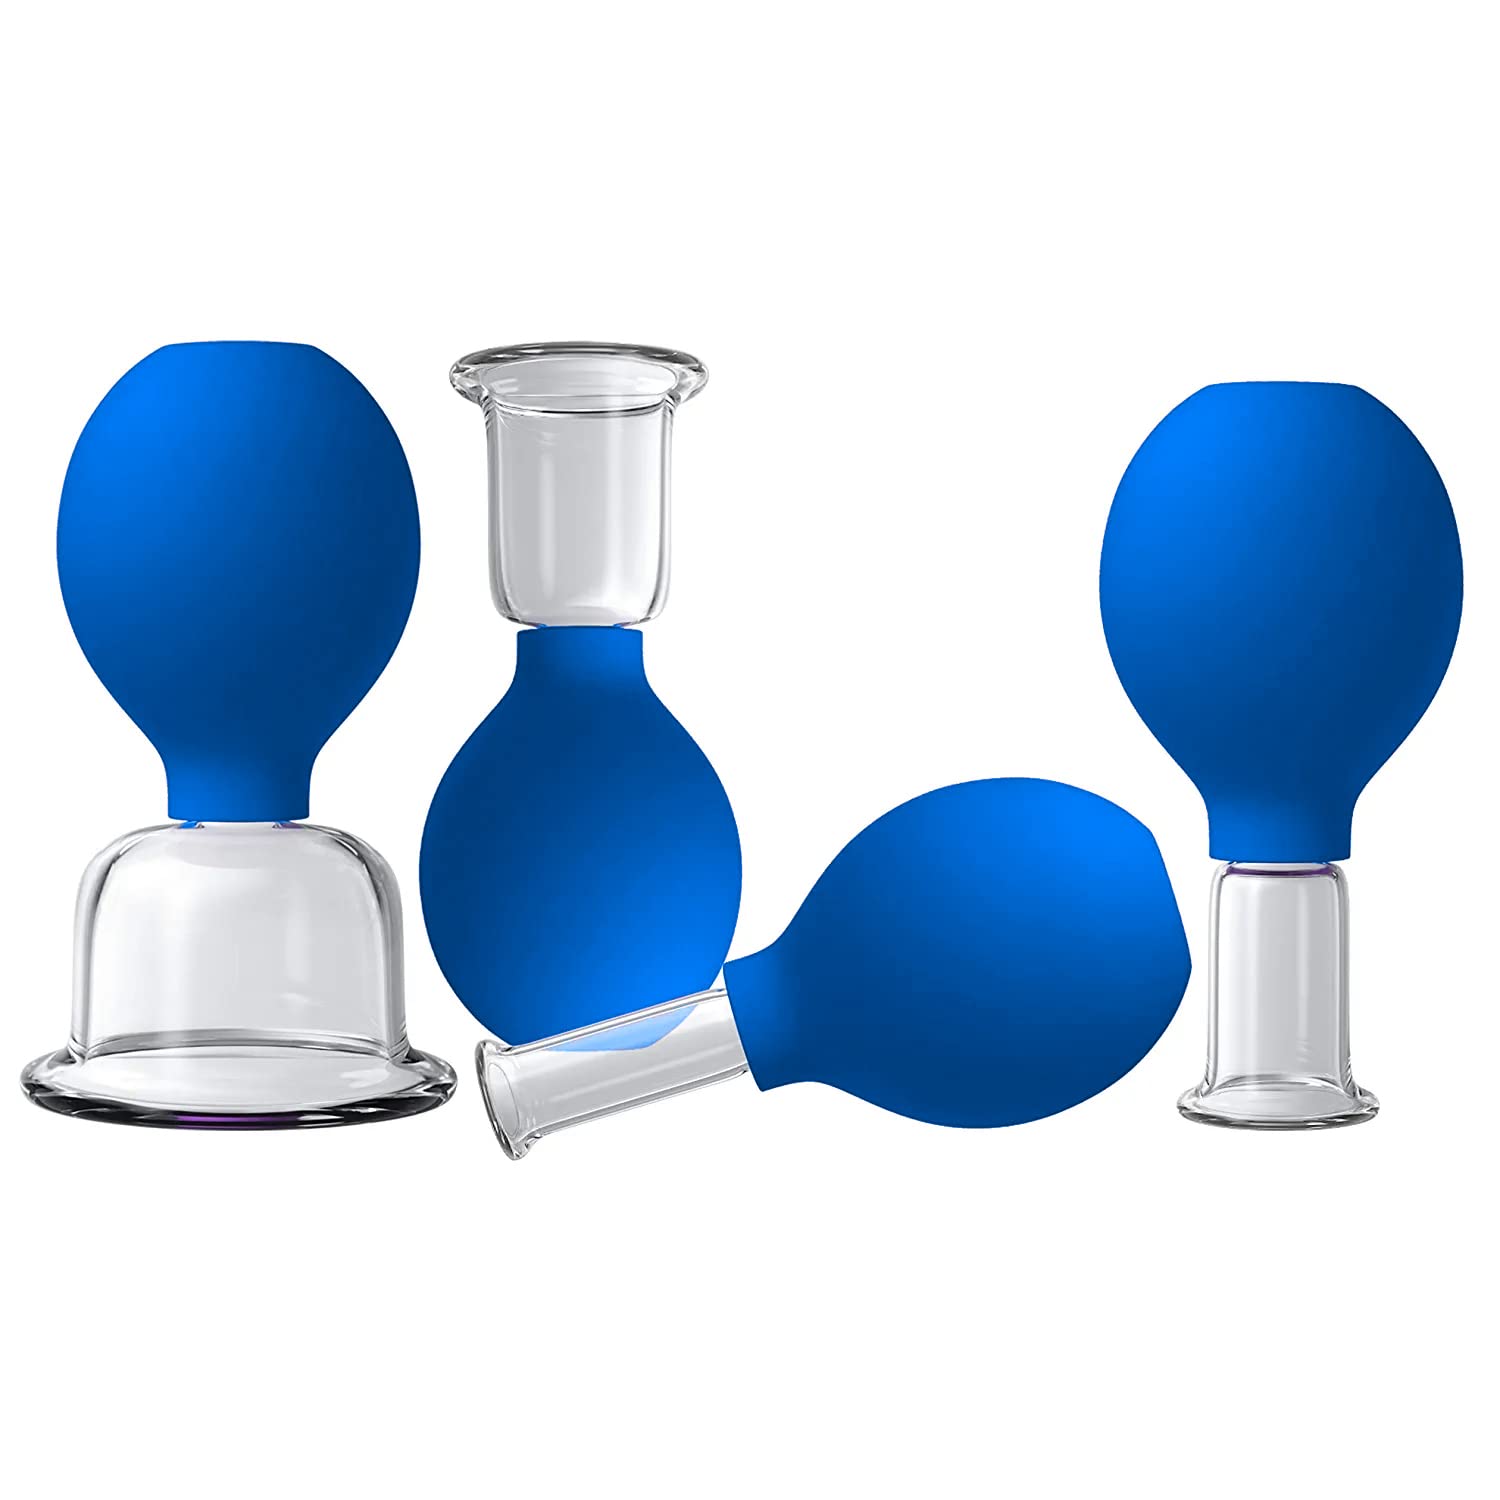 NEW! Glass Face and Body Cupping Set Blue, 4 Cups - Lure Essentials